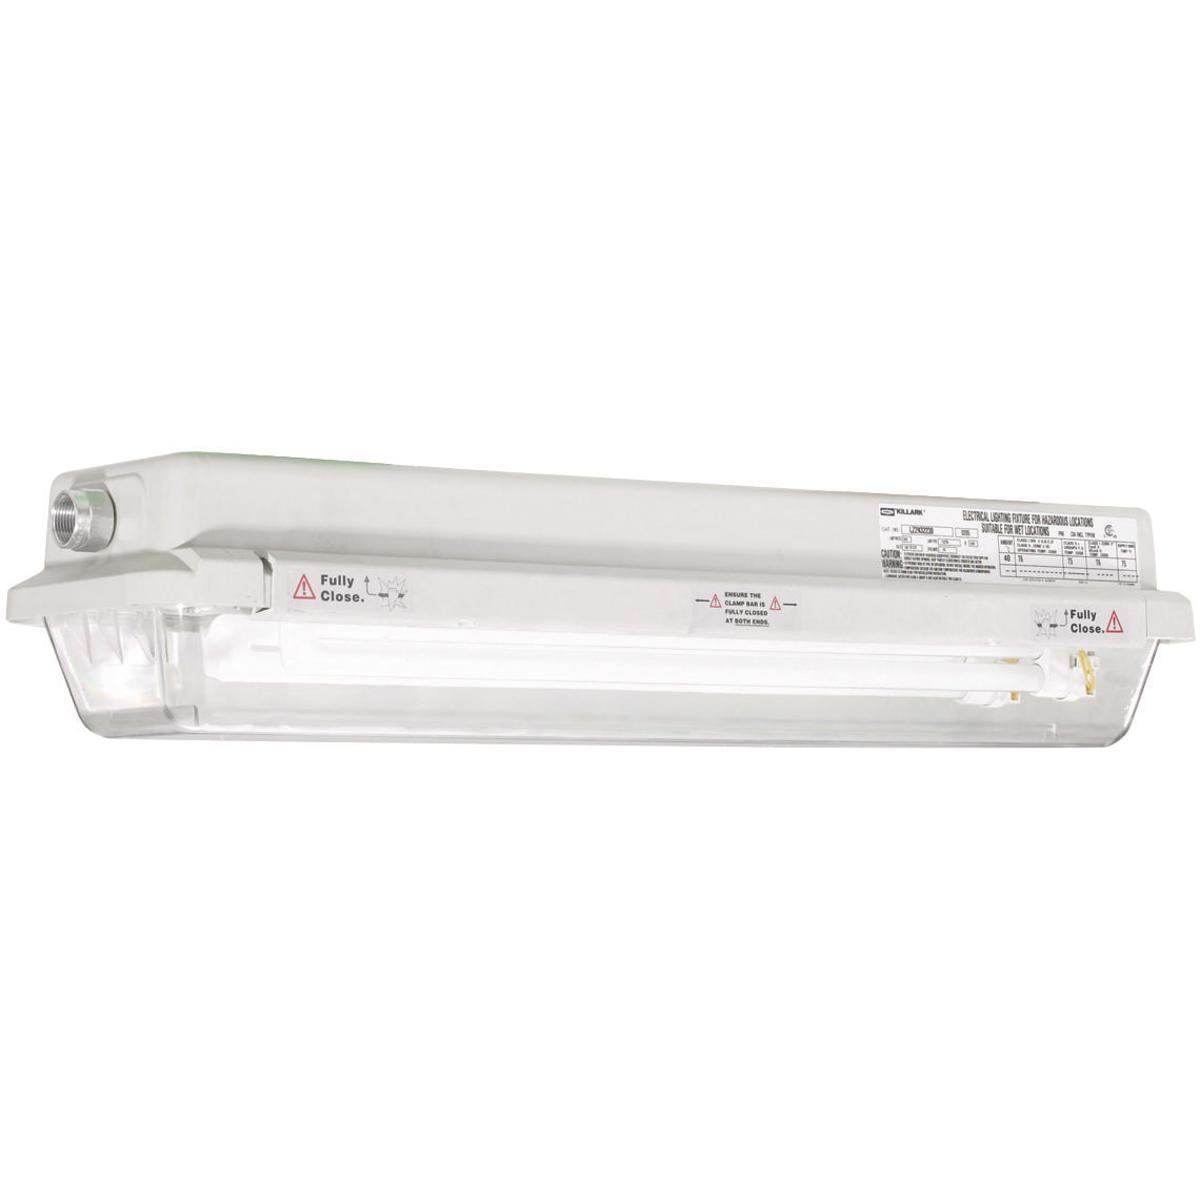 Hubbell LZ2NE1-40230 LZ2NE Series- Emergency - 40W 120-277V - 2' 2-Lamp Biaxial Electronic 50/60 Hz 0°F Start 4 -Pin  ; NEMA 4 & IP66 rated enclosure ; Housing-one piece fiberglass reinforced polyester or 316 Stainless Steel ; Clear Lexan® impact resistant polycarbonate lens 